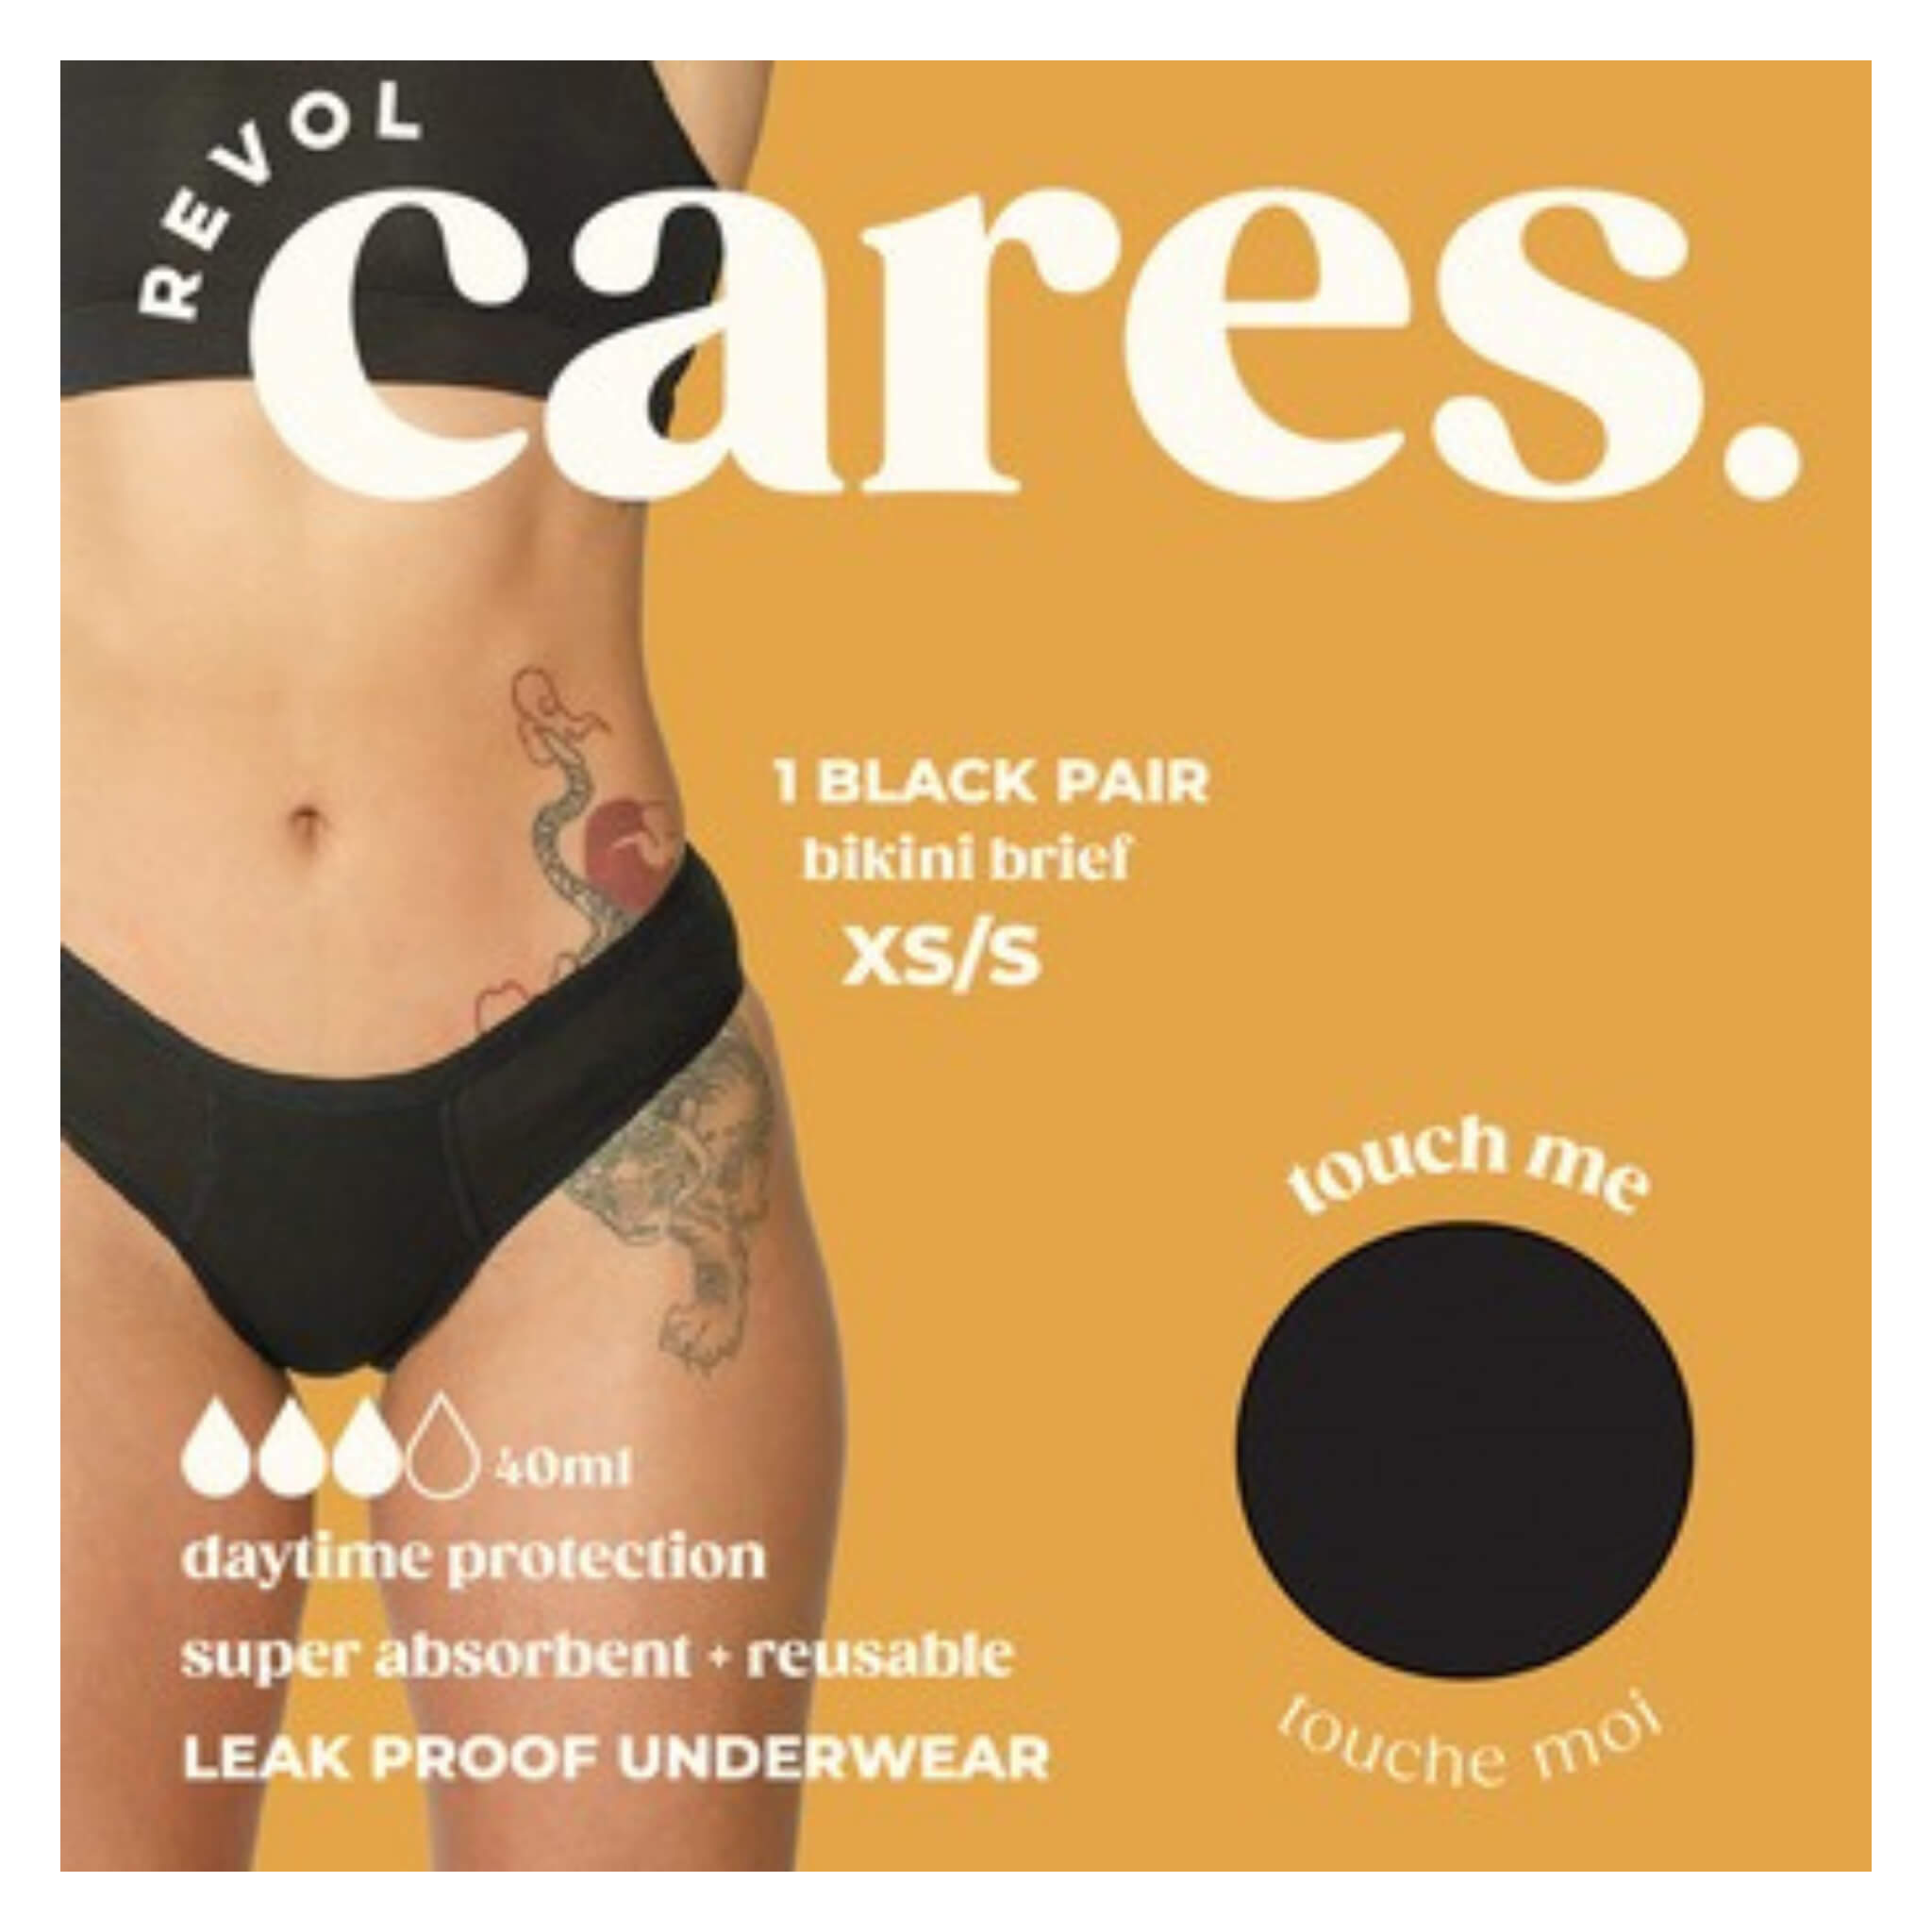 Revol Cares period underwear is now available in a thong design